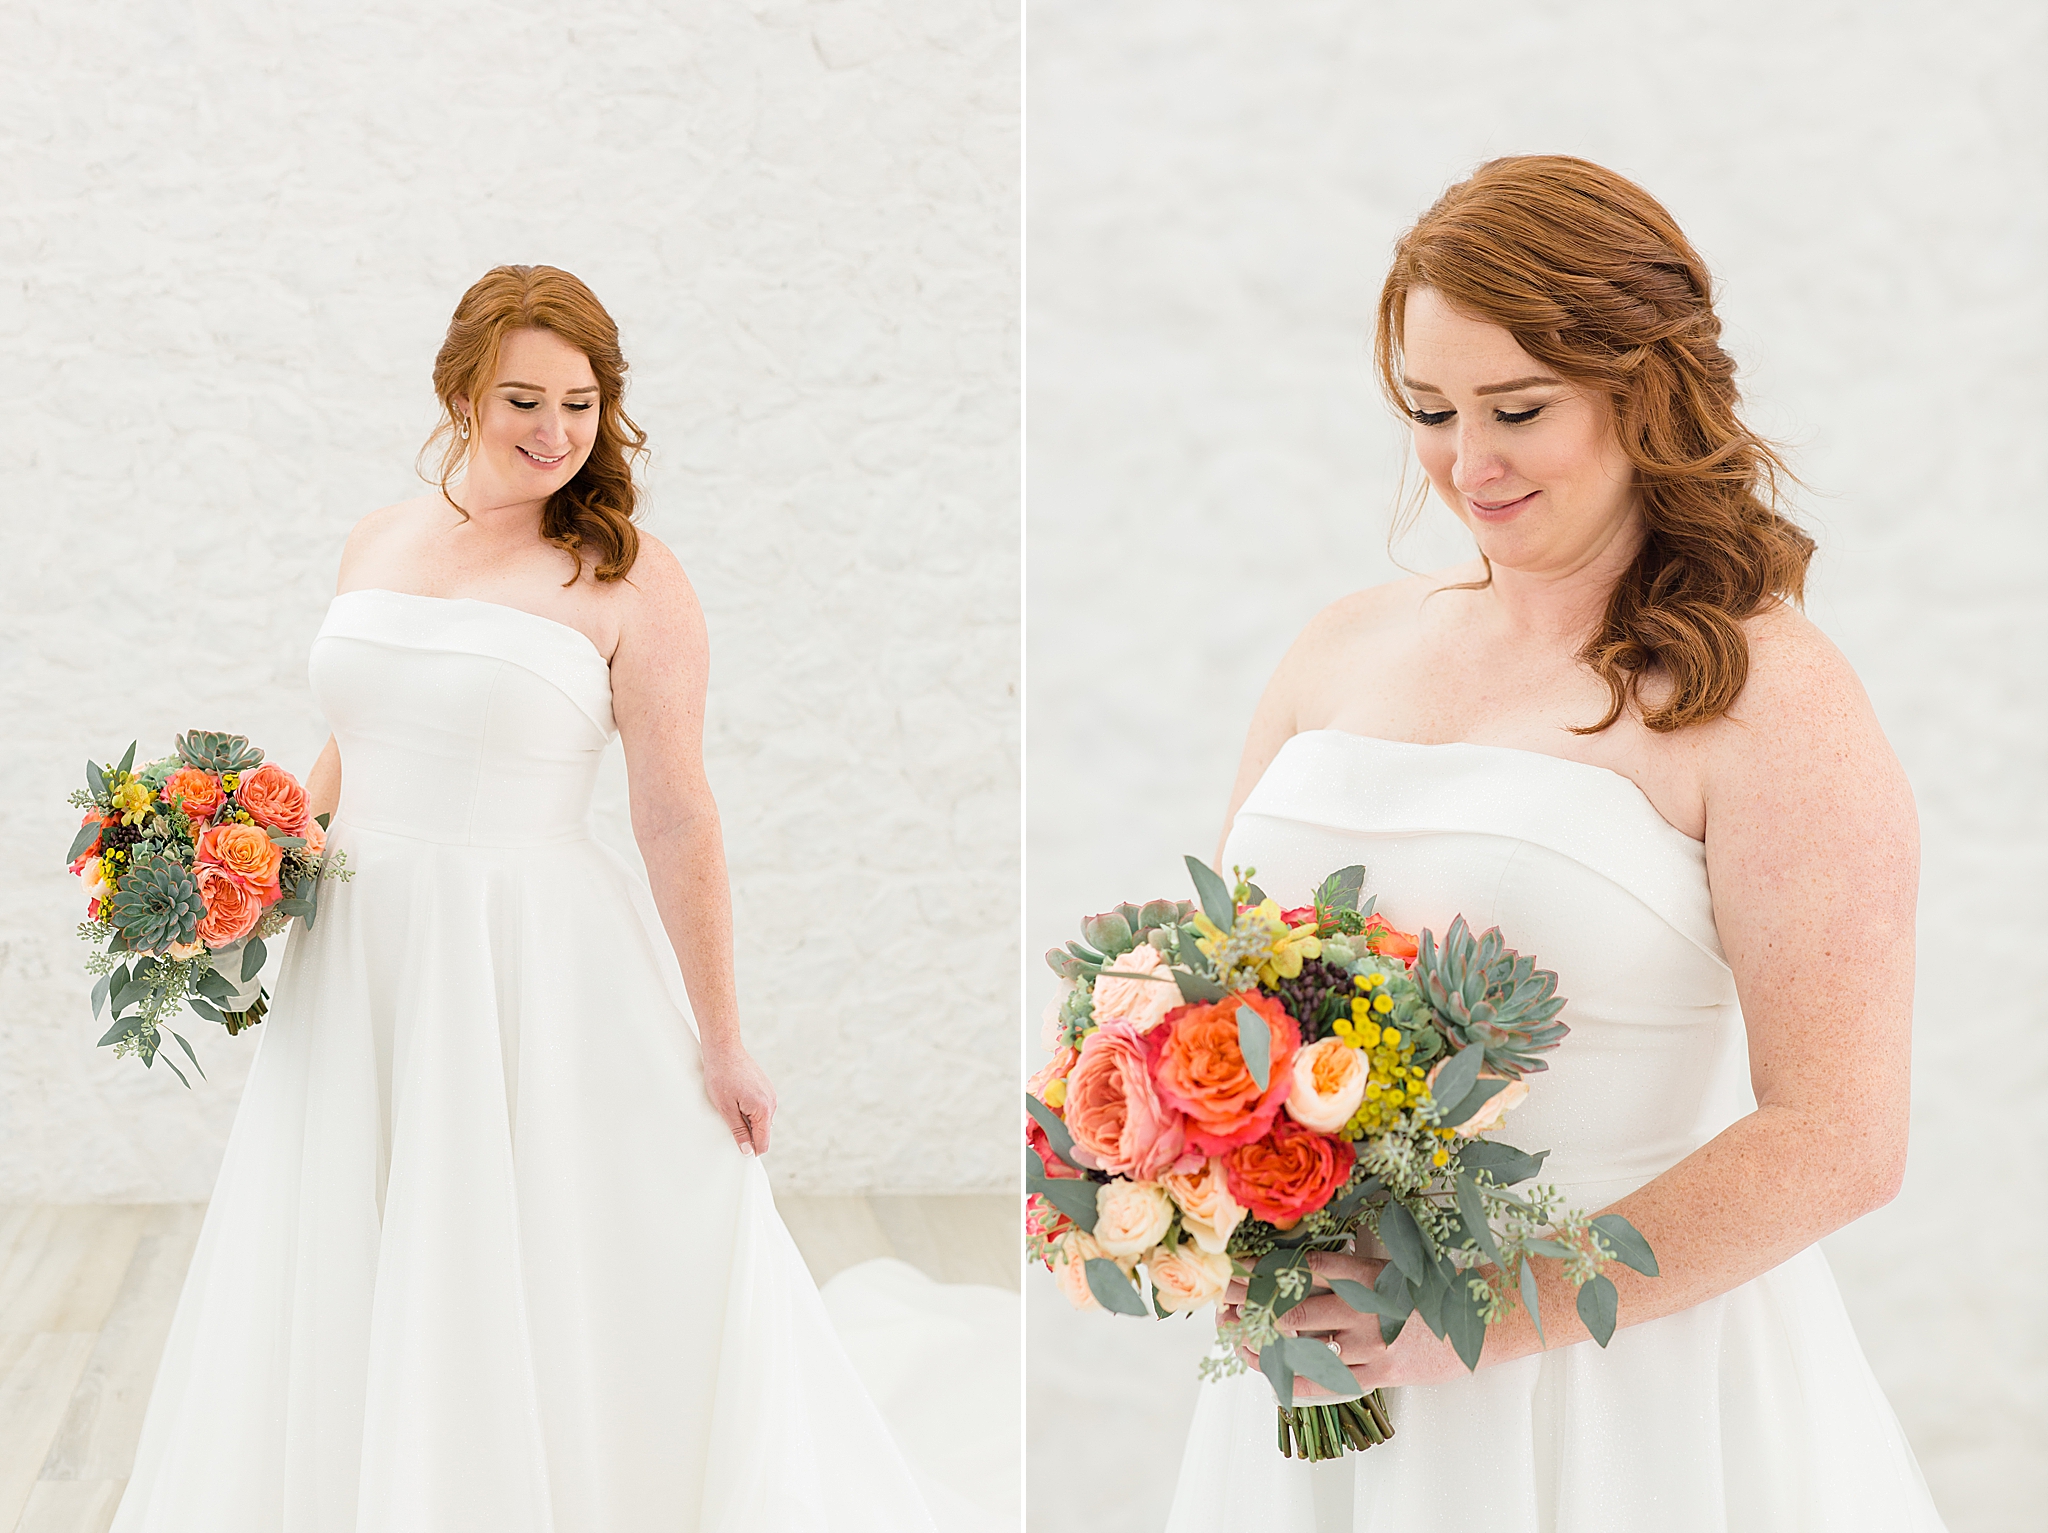 Texas bridal session for bride in strapless gown